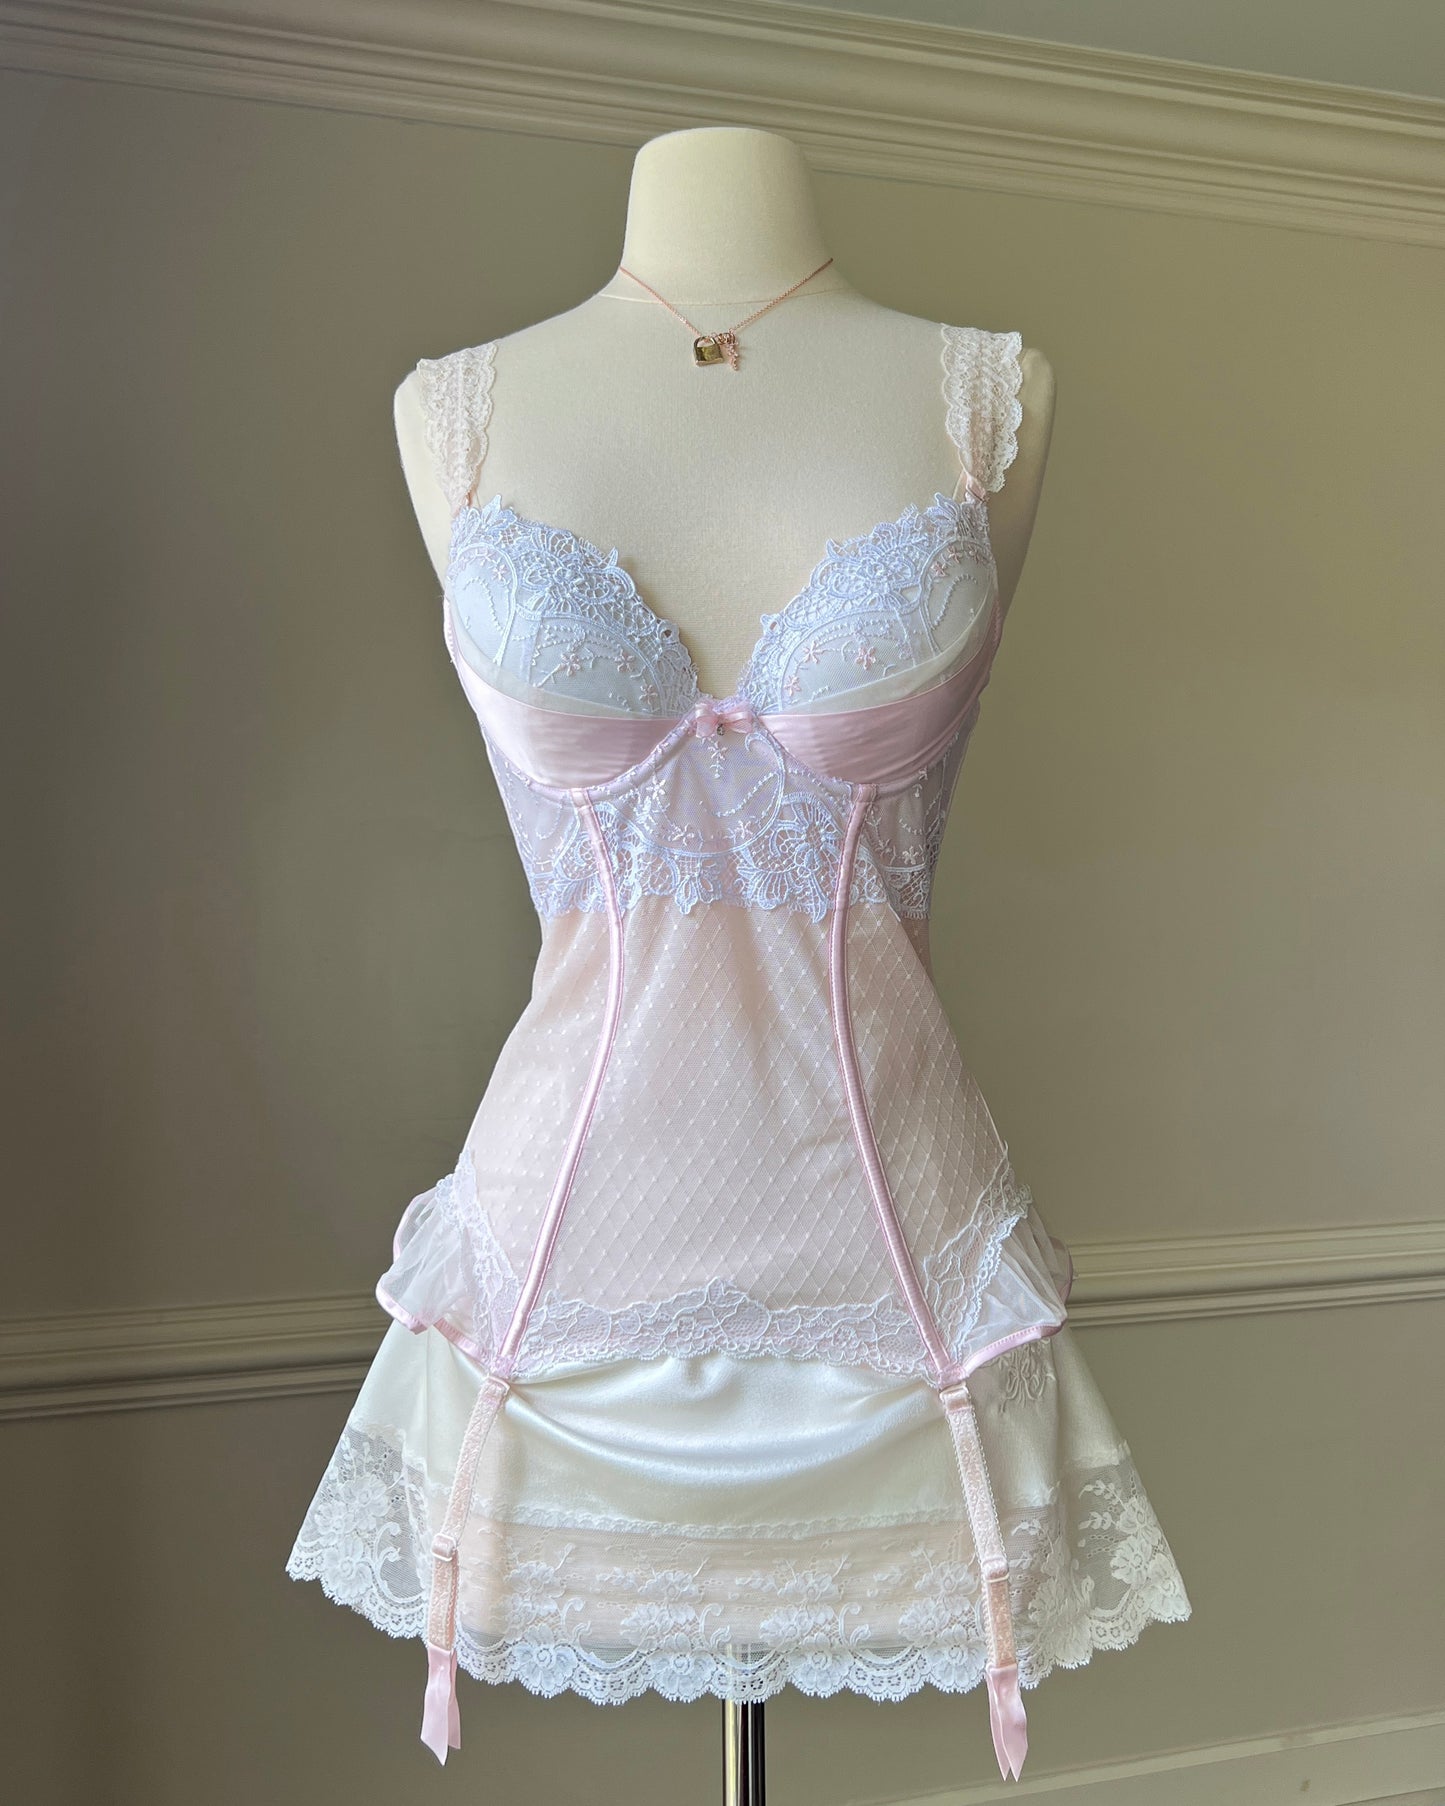 Regal Babydoll Special Corset featuring Soft Laced Bustier with Sheer Polkas Bodice